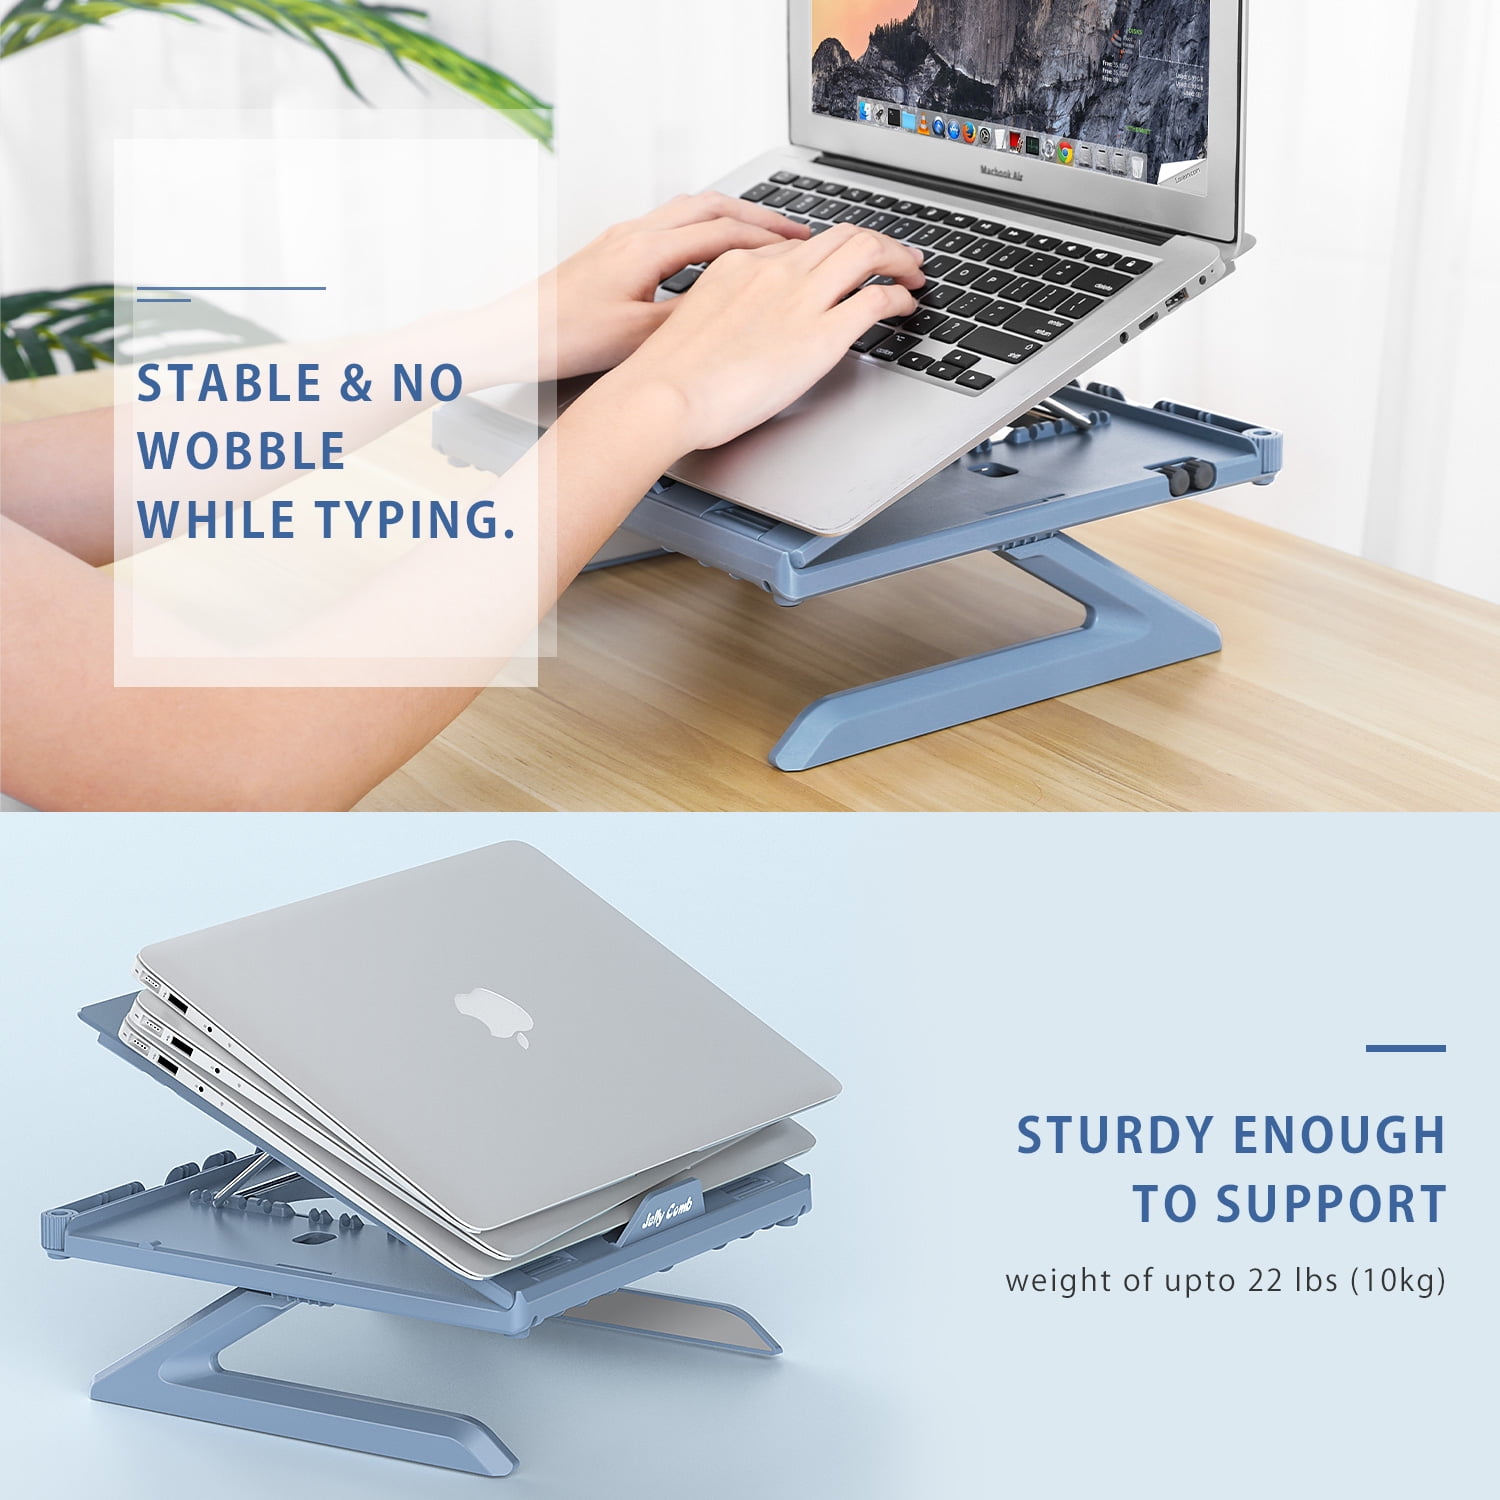 Ventilated Portable Stand Tray for MacBook 9-Adjustable Height Laptop Riser with Foldable Legs and Cell Phone Holder Notebook Black Tablet Jelly Comb Foldable Laptop Stand with RGB 